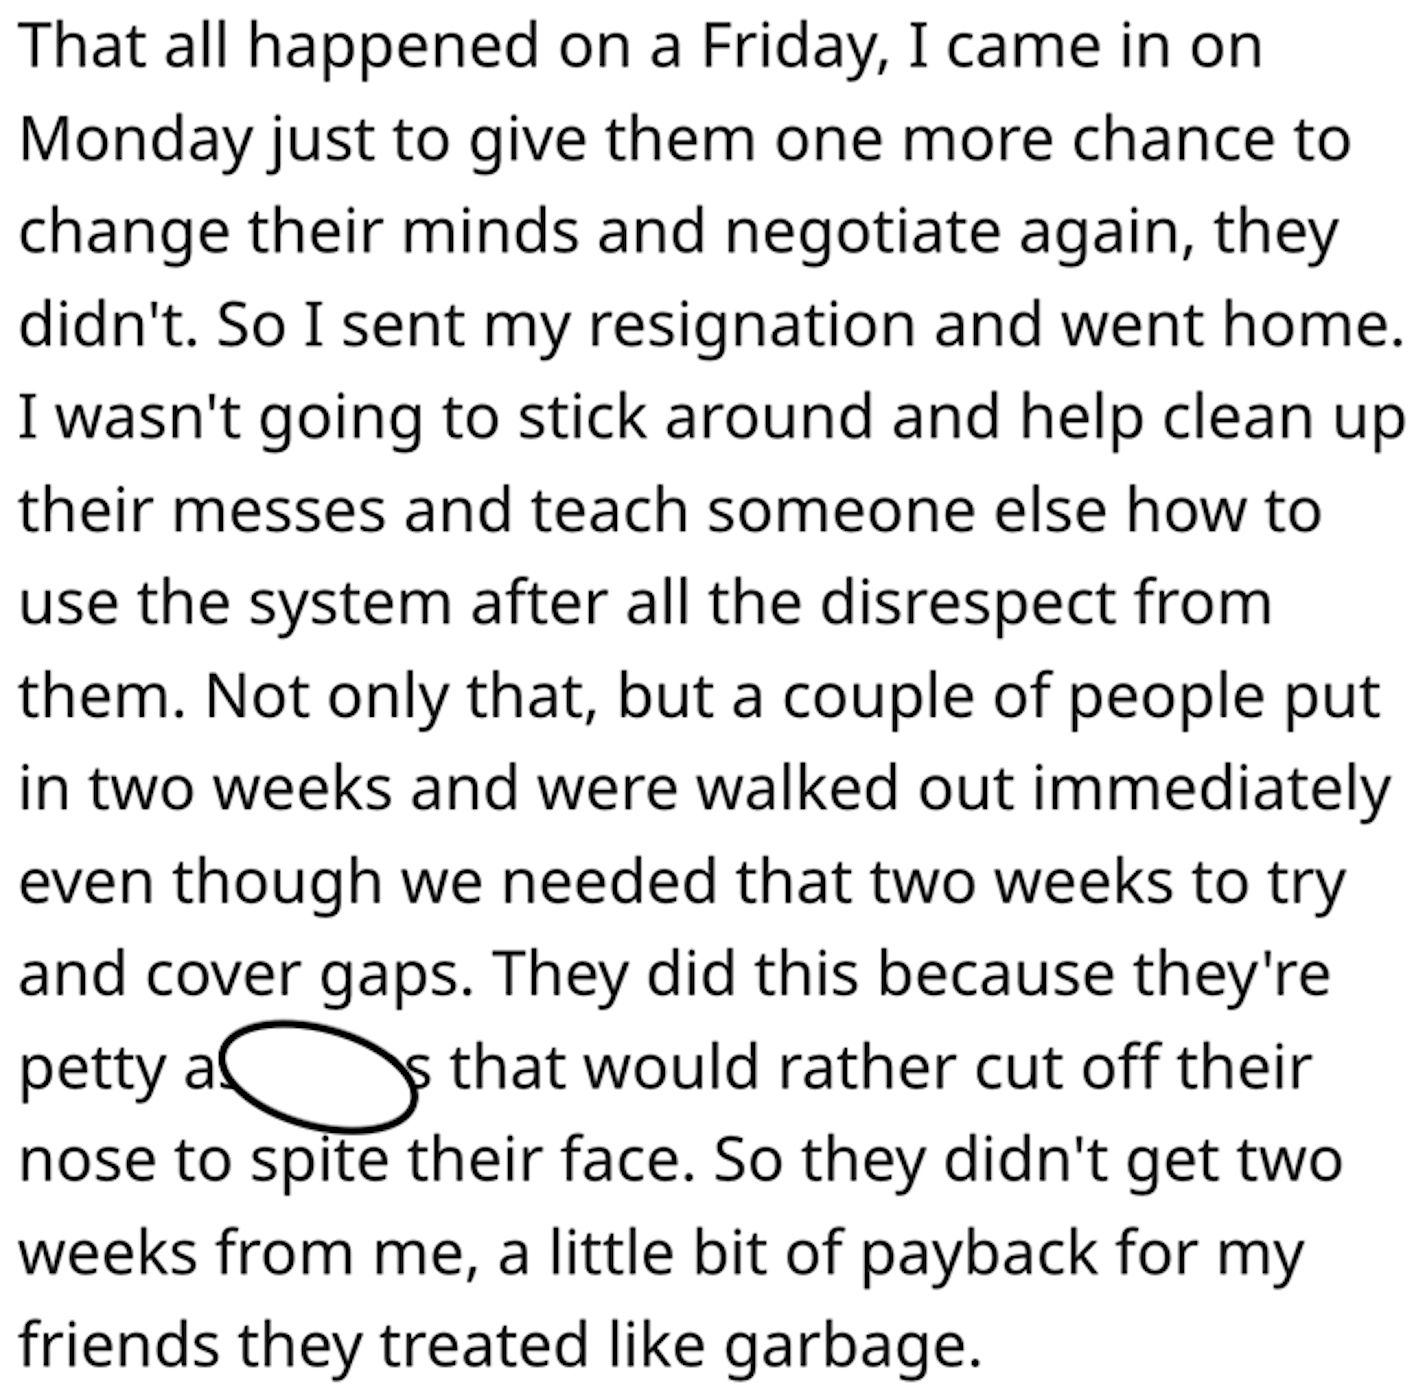 point - That all happened on a Friday, I came in on Monday just to give them one more chance to change their minds and negotiate again, they didn't. So I sent my resignation and went home. I wasn't going to stick around and help clean up their messes and 